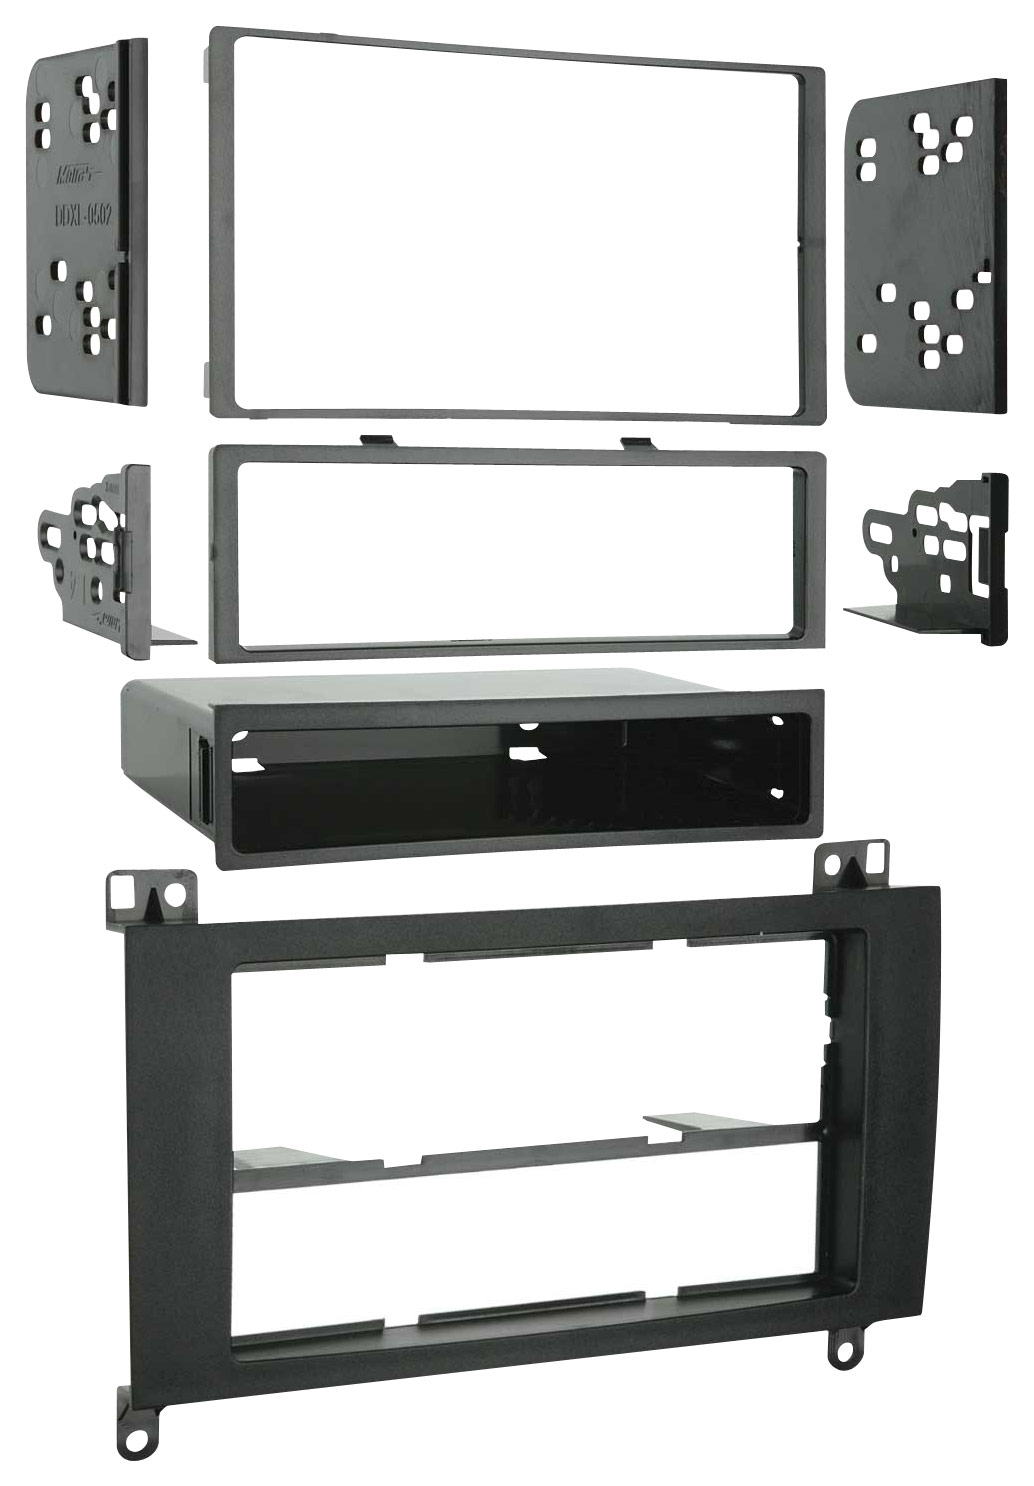 Metra - Installation Kit for 2007-2009 Dodge Sprinter Vehicles - Black was $16.99 now $12.74 (25.0% off)